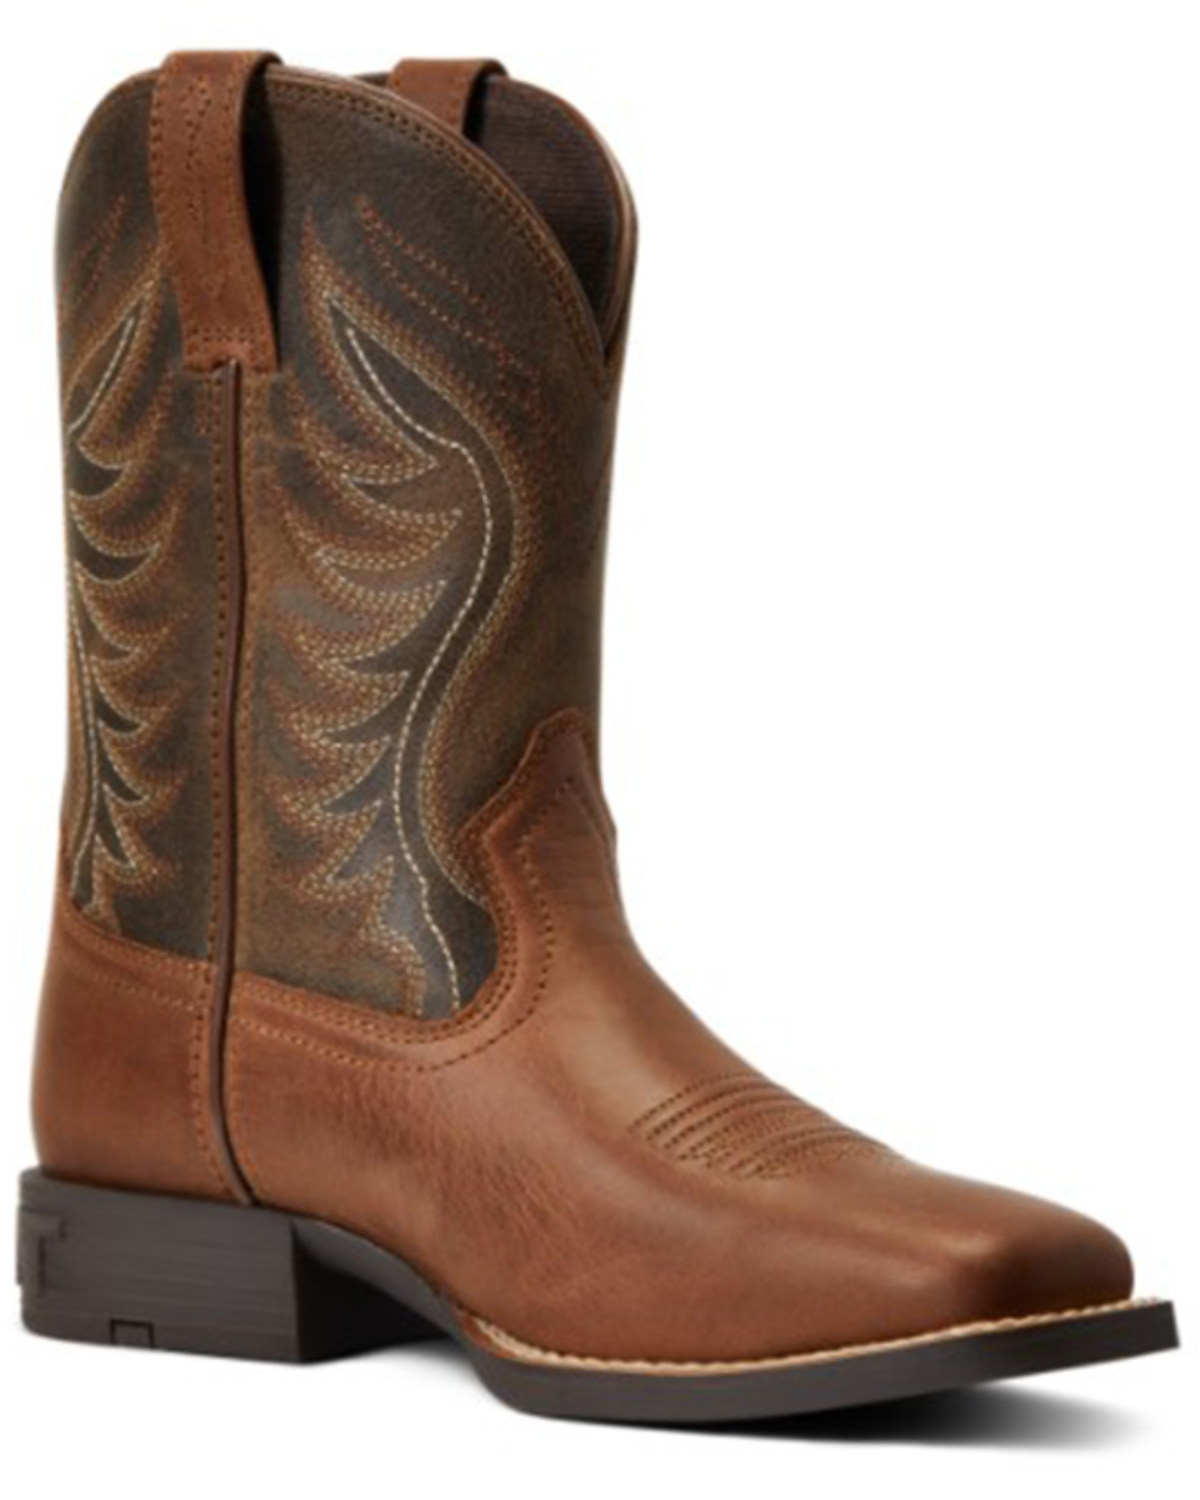 Ariat Boys' Amos Leather Western Boot - Broad Square Toe